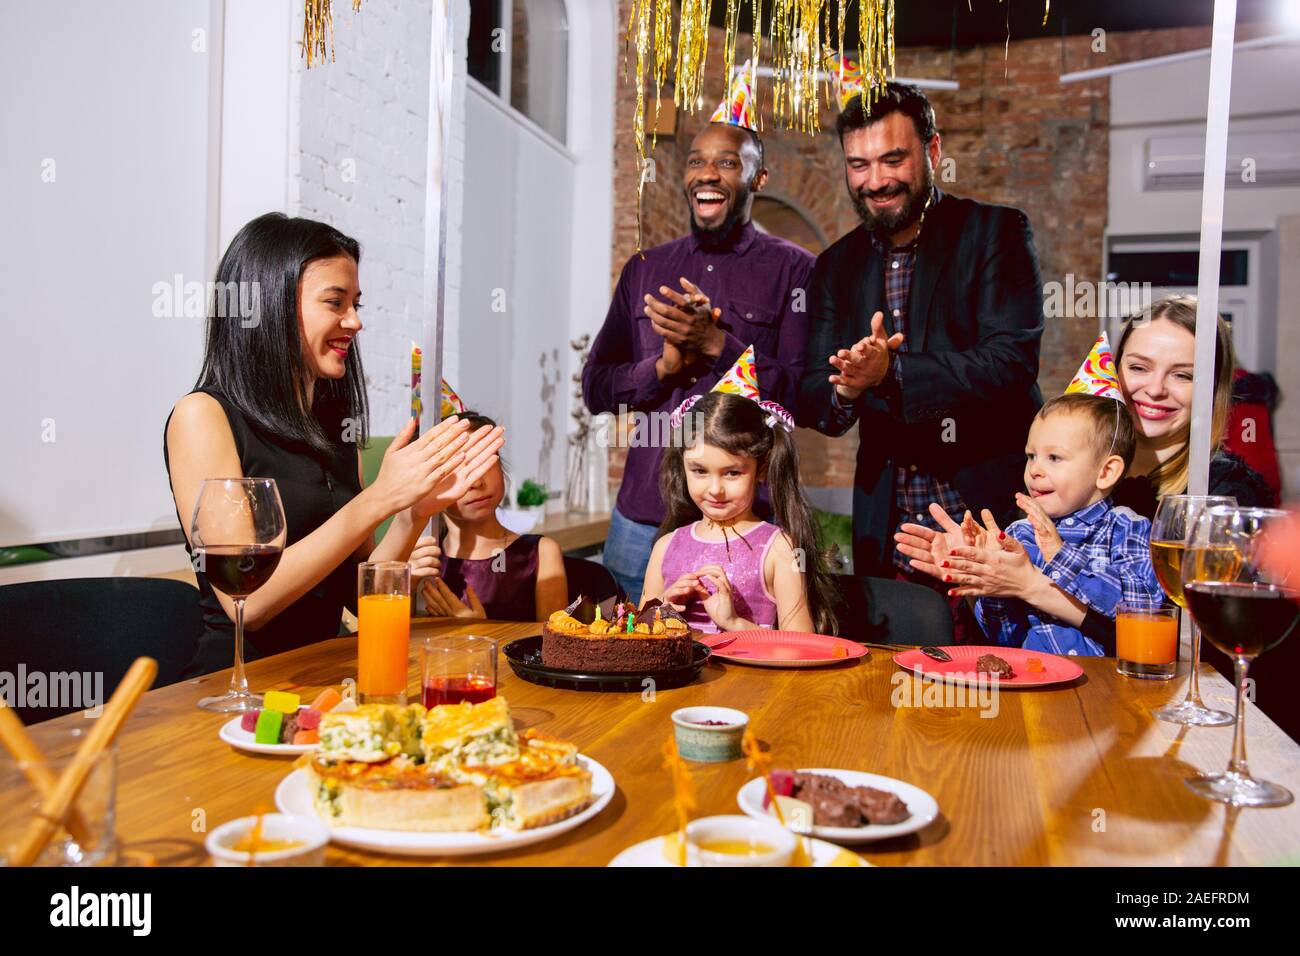 Portrait of happy multiethnic family celebrating a birthday at home. Big family eating cake and drinking wine while greeting and having fun children. Celebration, family, party, home concept. Stock Photo